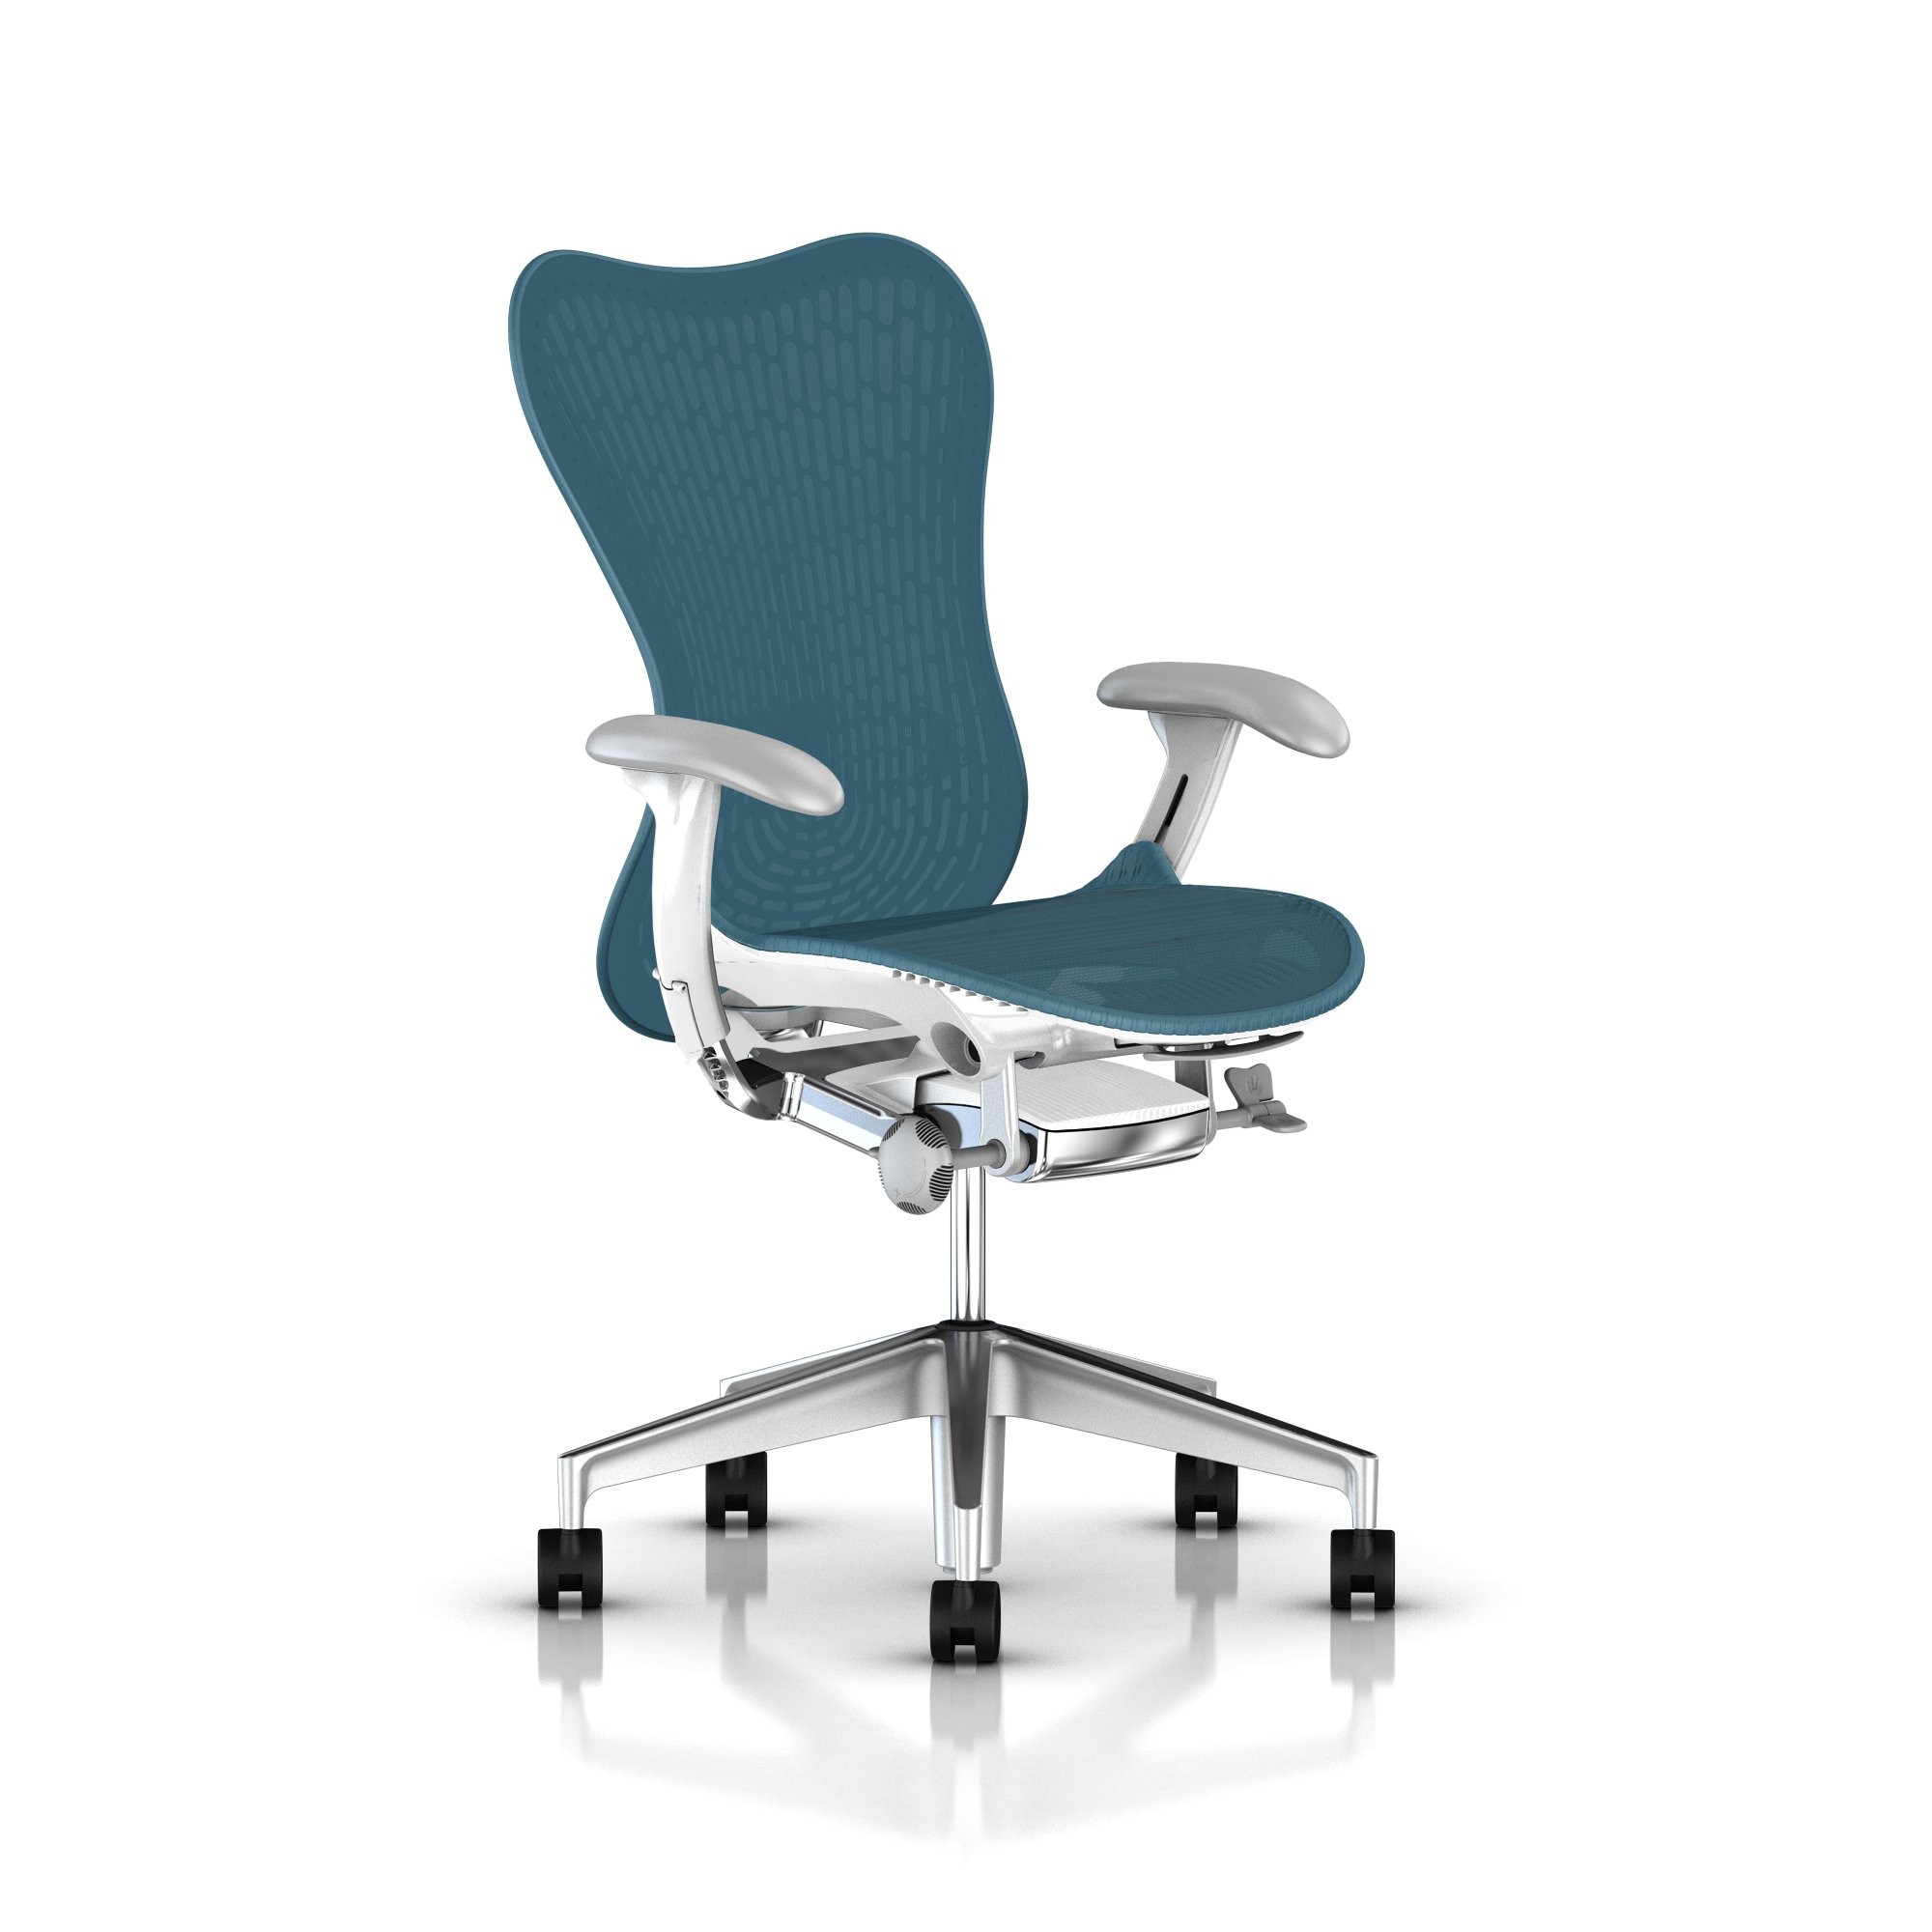 mirra chair herman miller mirra chair executive turquoise front